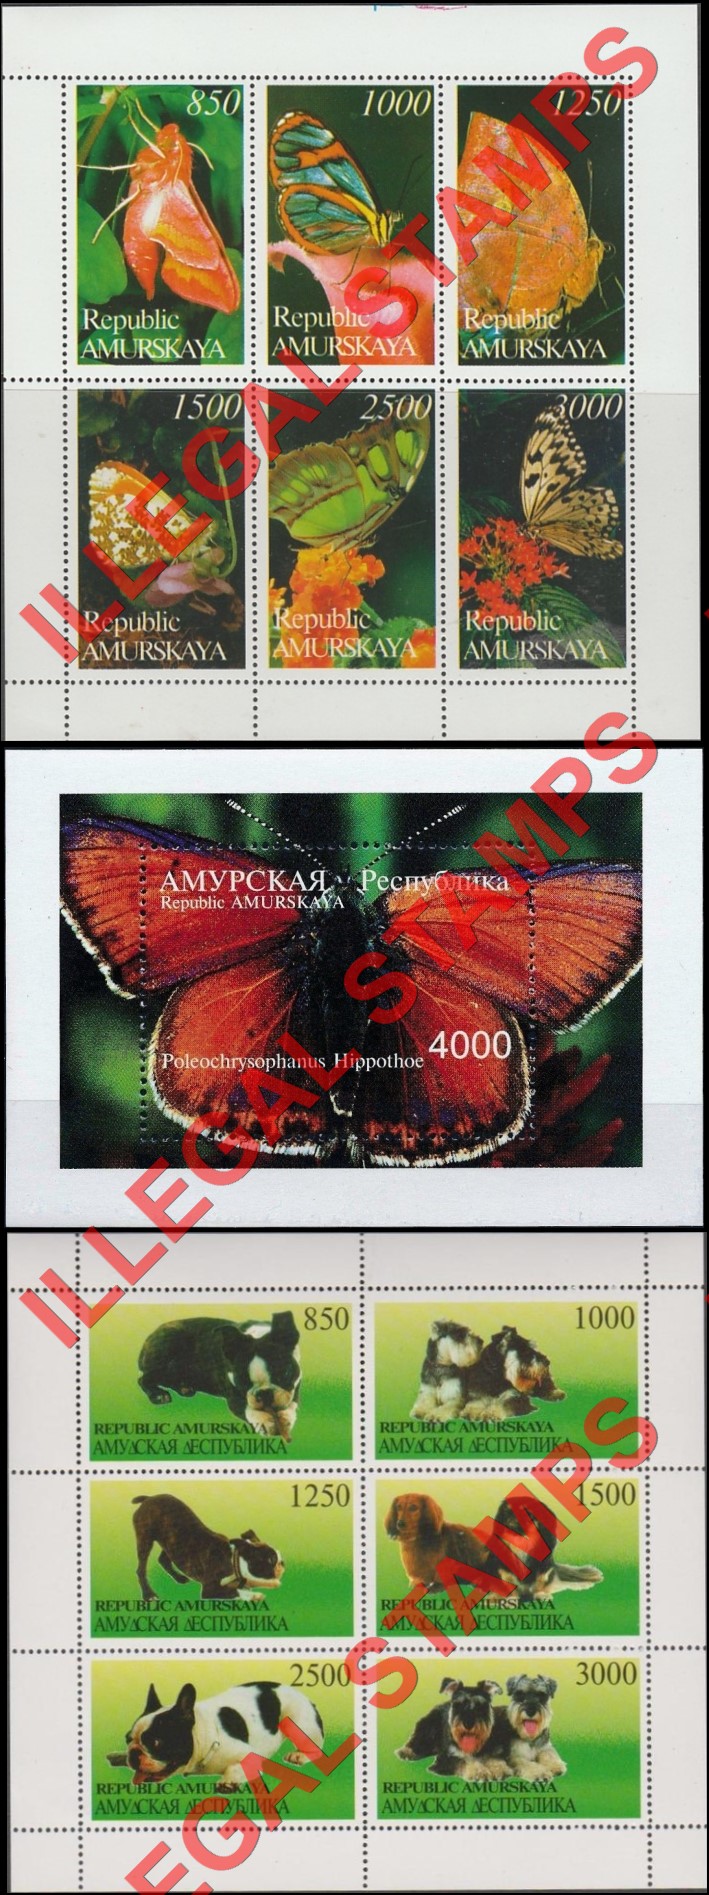 Amurskaya Province 1997 Butterflies and Dogs Illegal Stamps